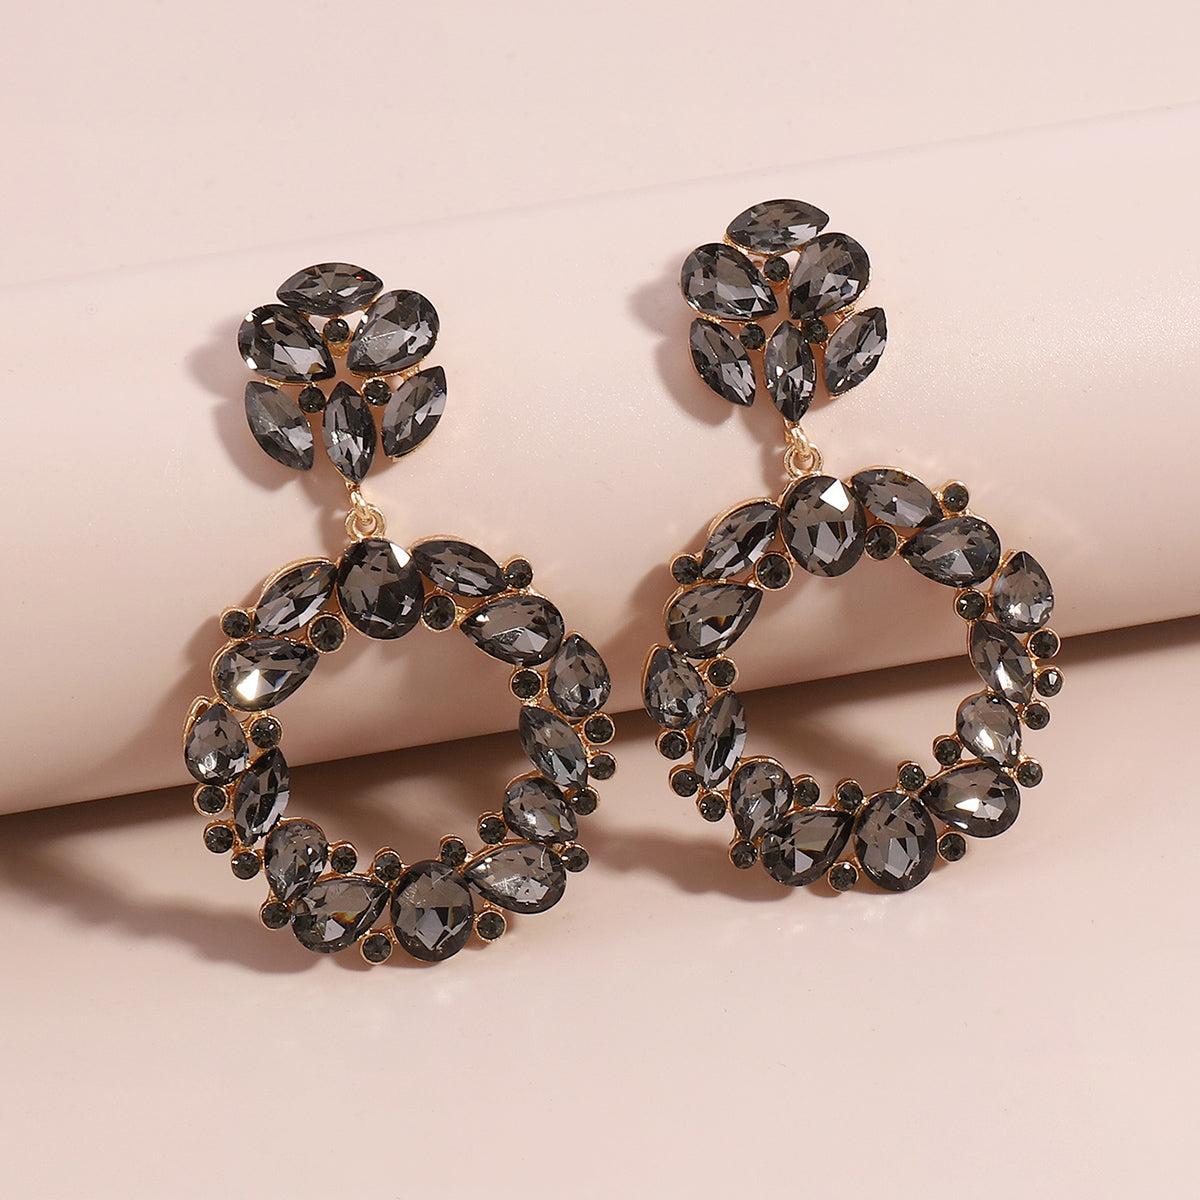 Retro Circle Women'S Drop Earrings by Alloy with Rhinestones